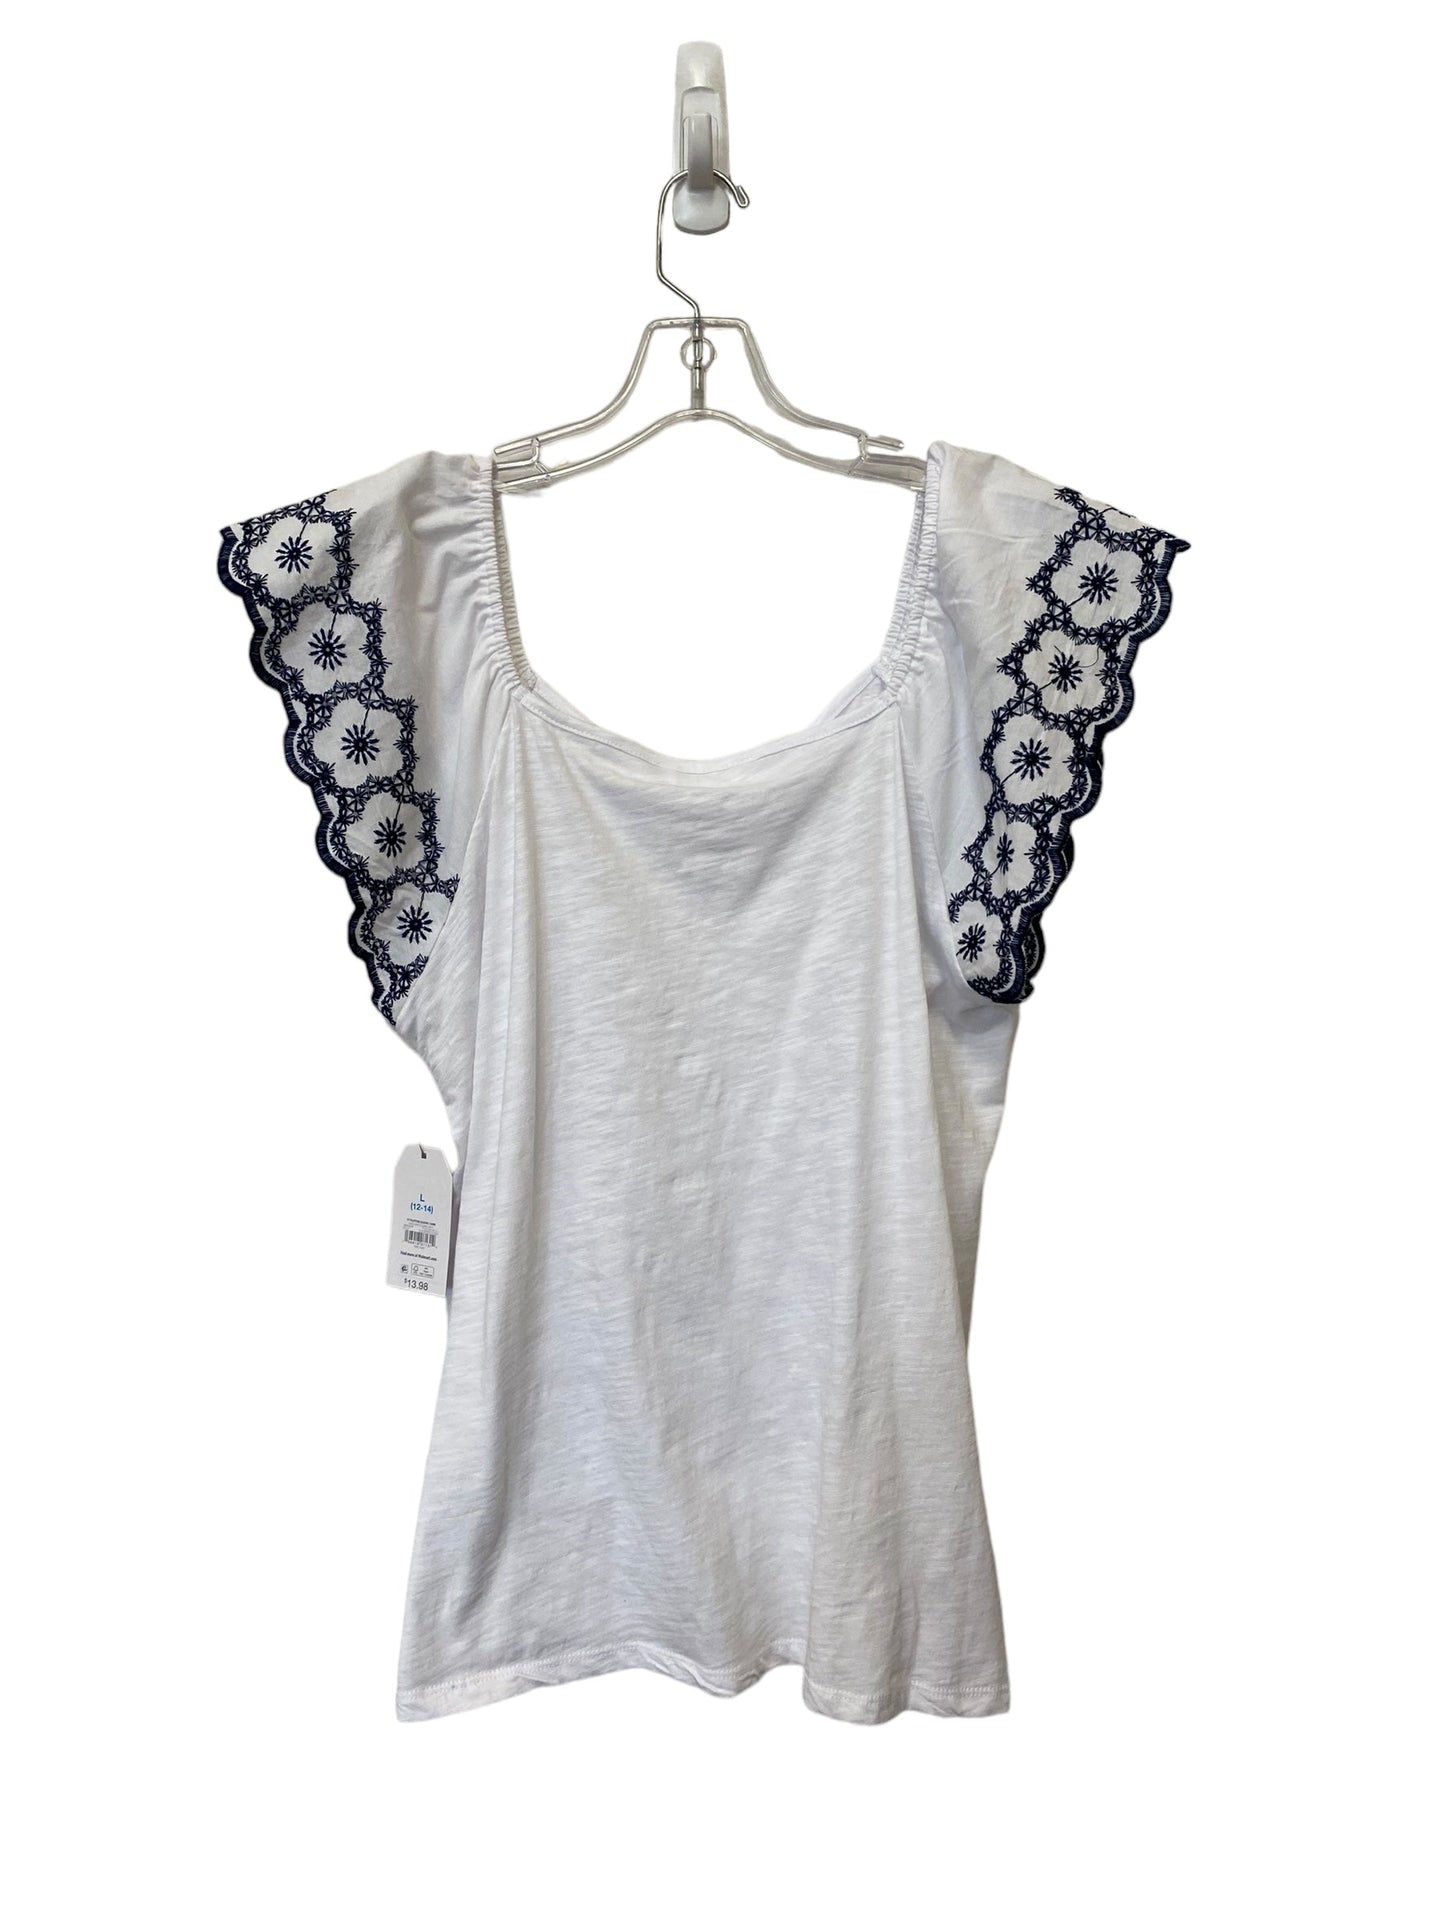 White Top Sleeveless Time And Tru, Size L